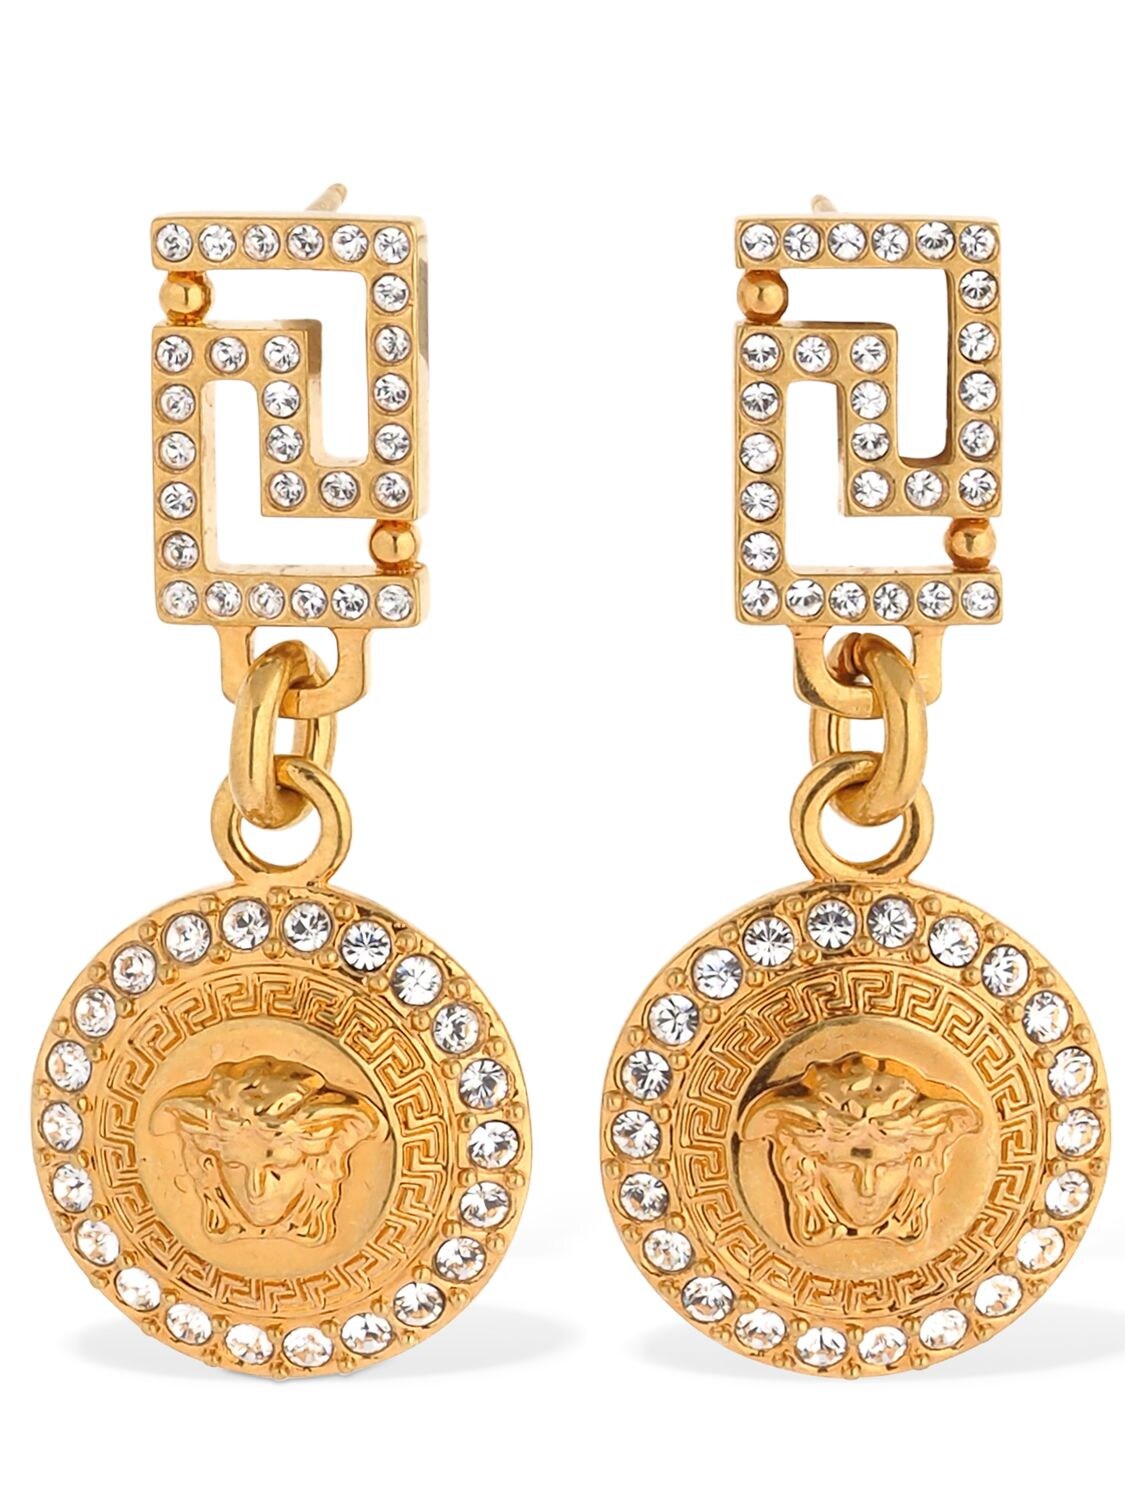 VERSACE TRIBUTE PENDANT EARRINGS W/ CRYSTALS,70I816005-S0NPVA2